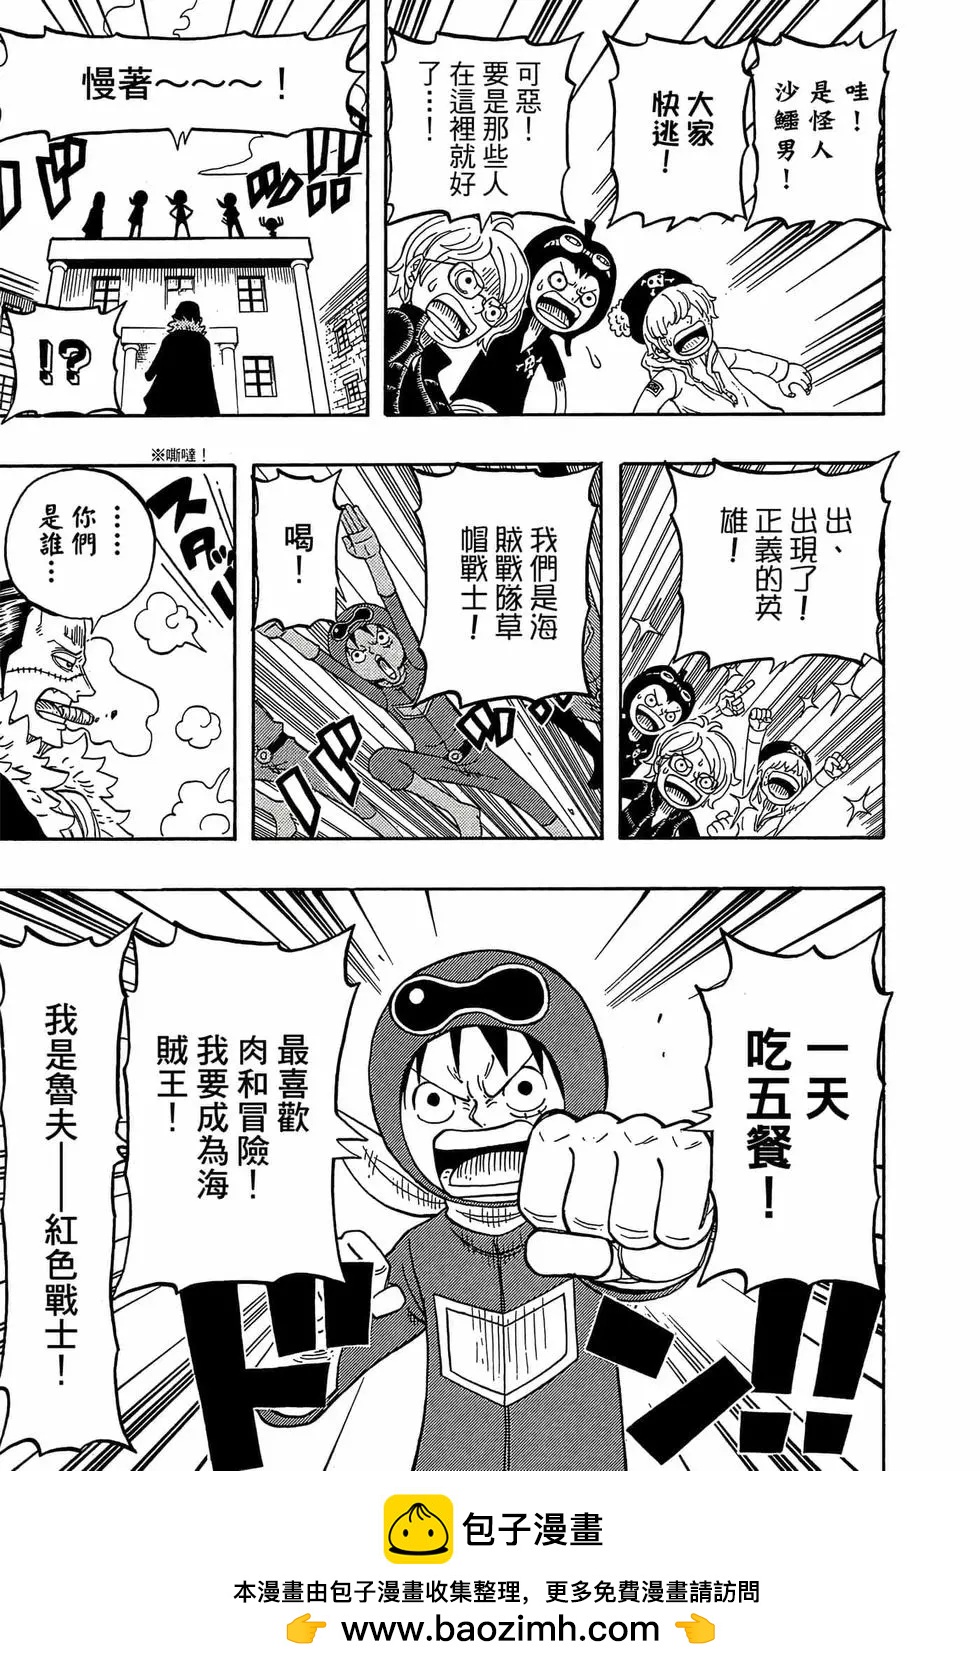 One piece party - 第01卷(4/4) - 4